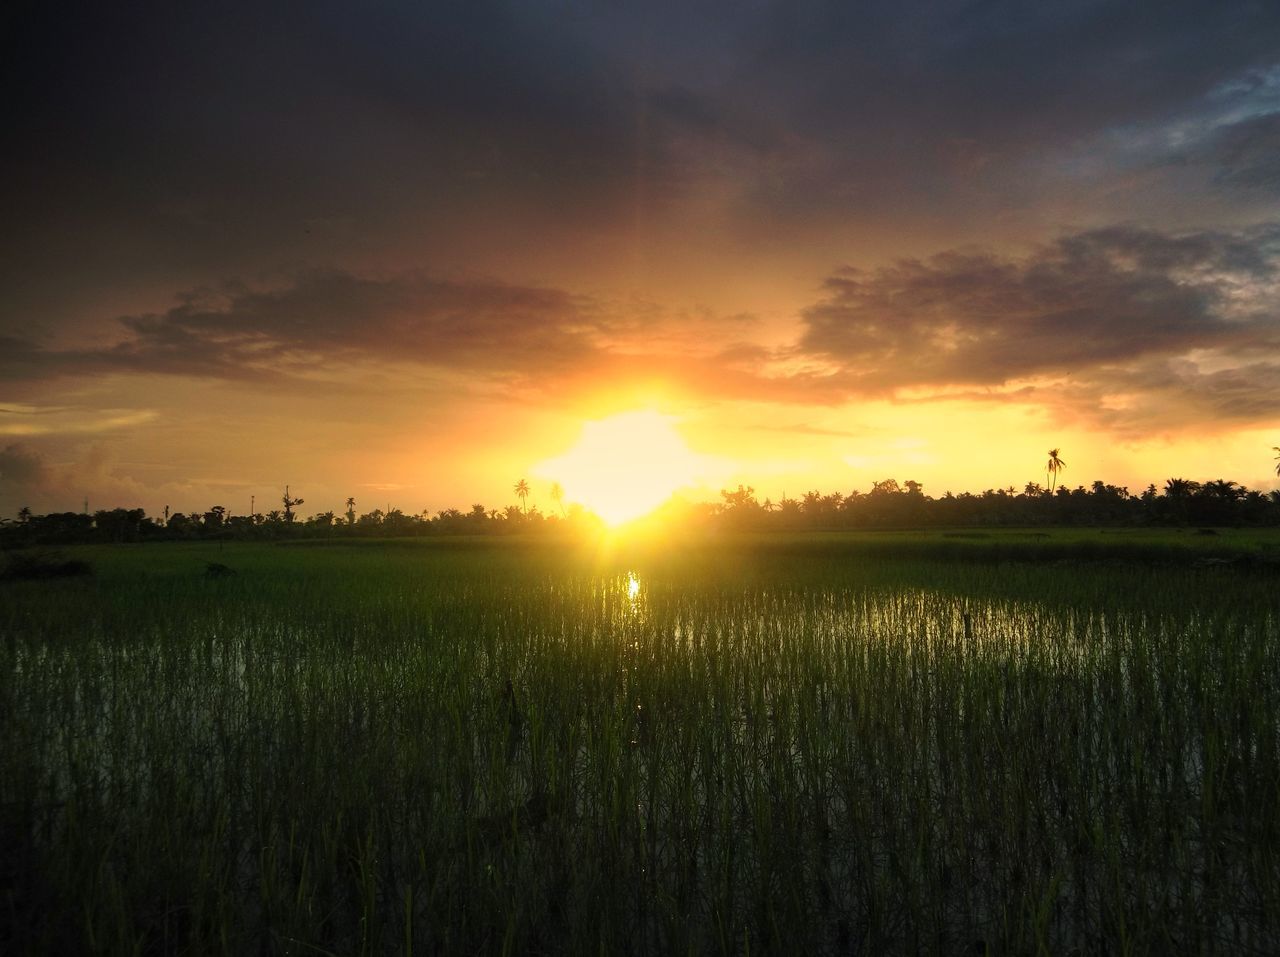 sunset, nature, field, tranquil scene, tranquility, scenics, beauty in nature, growth, agriculture, sun, landscape, rural scene, sunbeam, farm, sky, no people, outdoors, sunlight, silhouette, plant, grass, rice paddy, cereal plant, tree, day